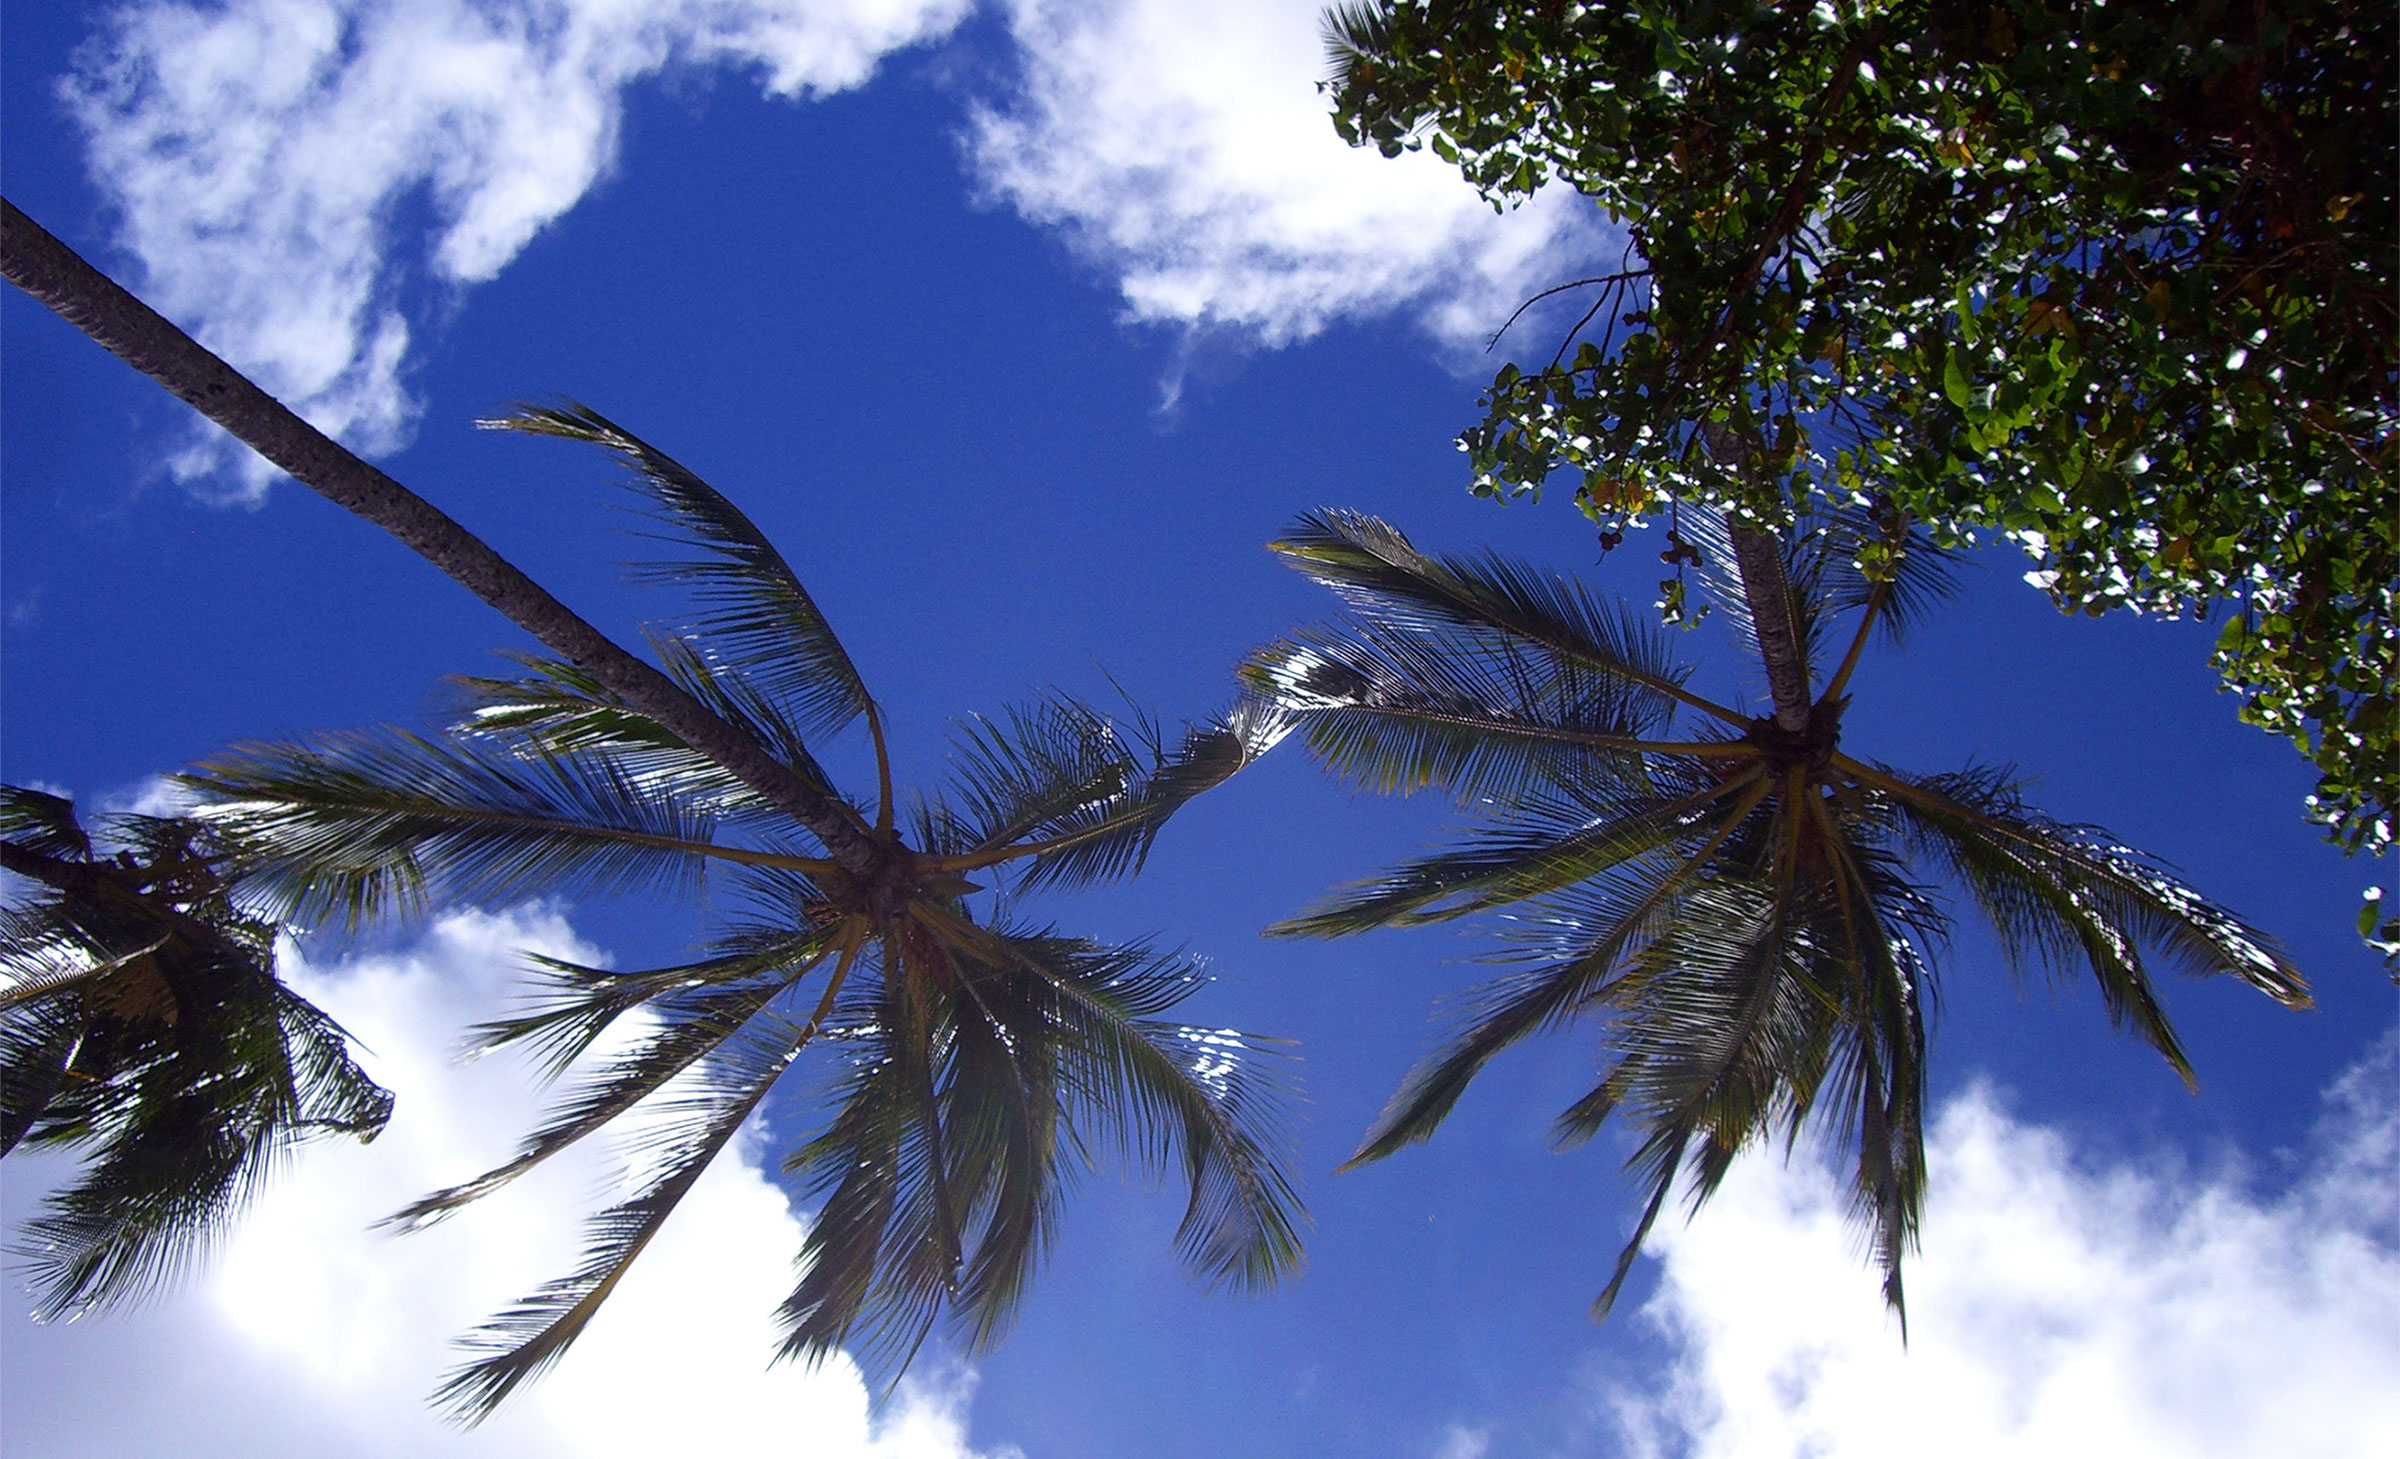 Looking up at palm trees.